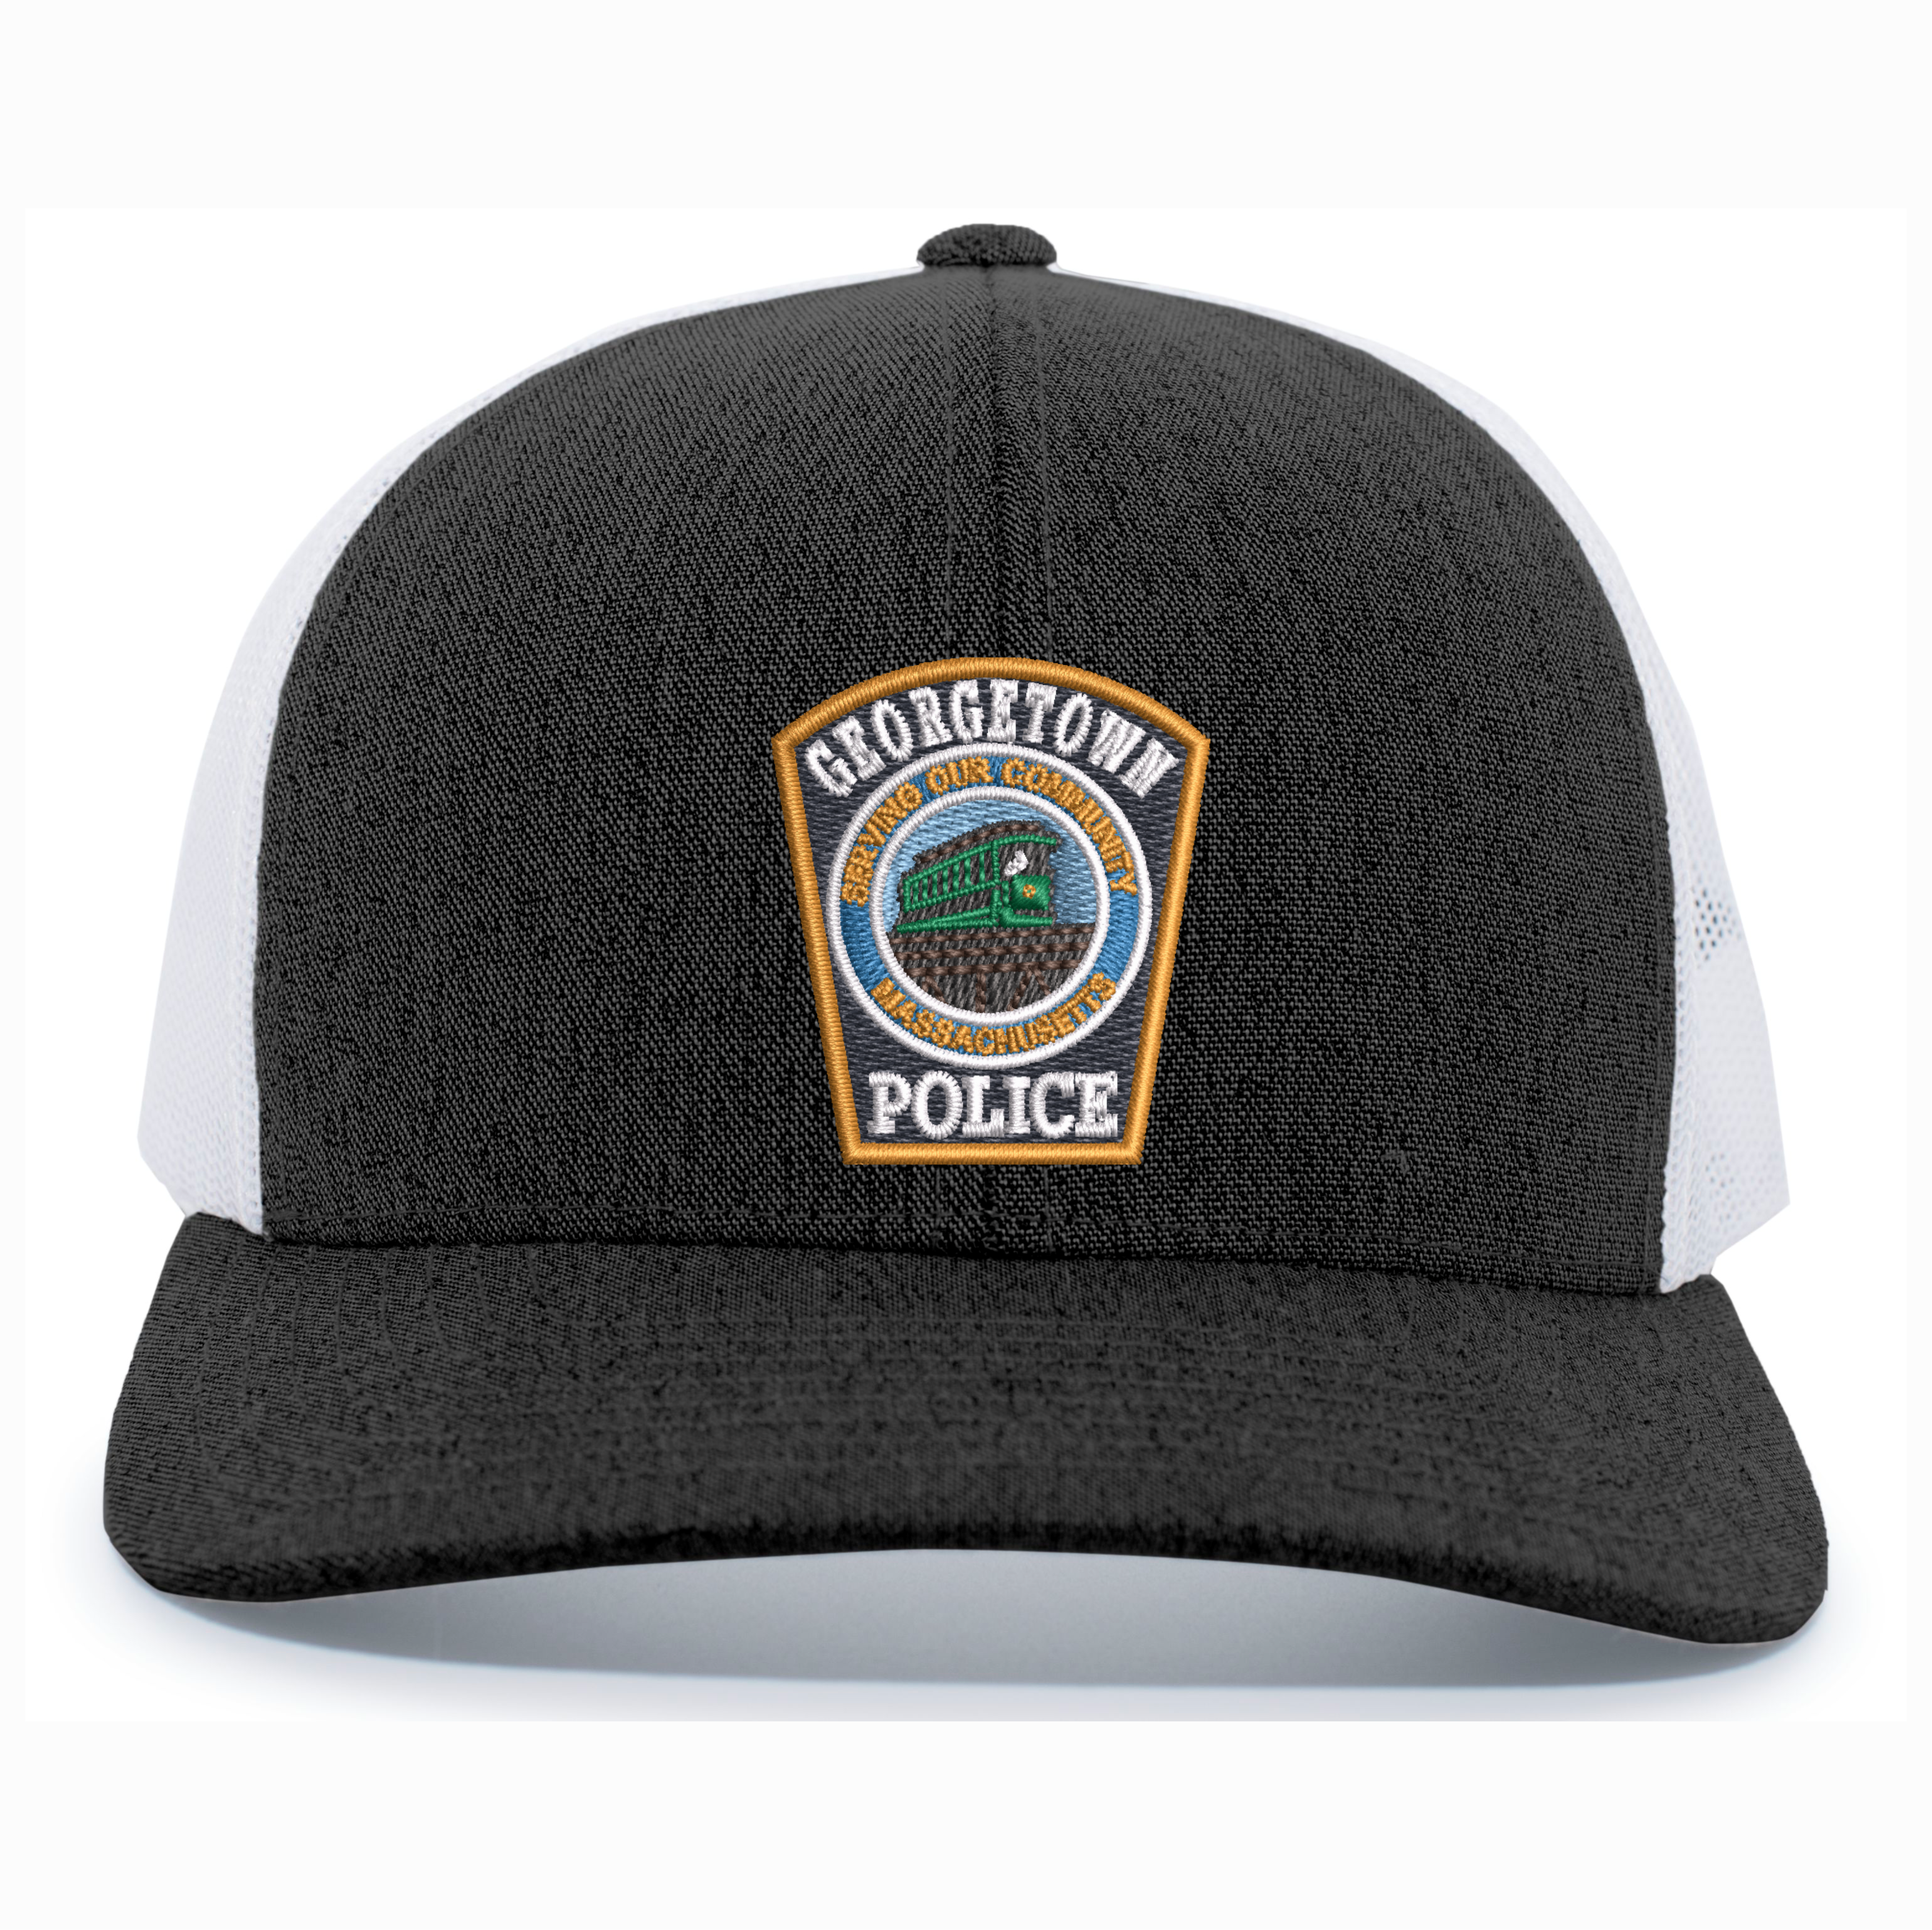 Georgetown Police Embroider Hats and Beanies